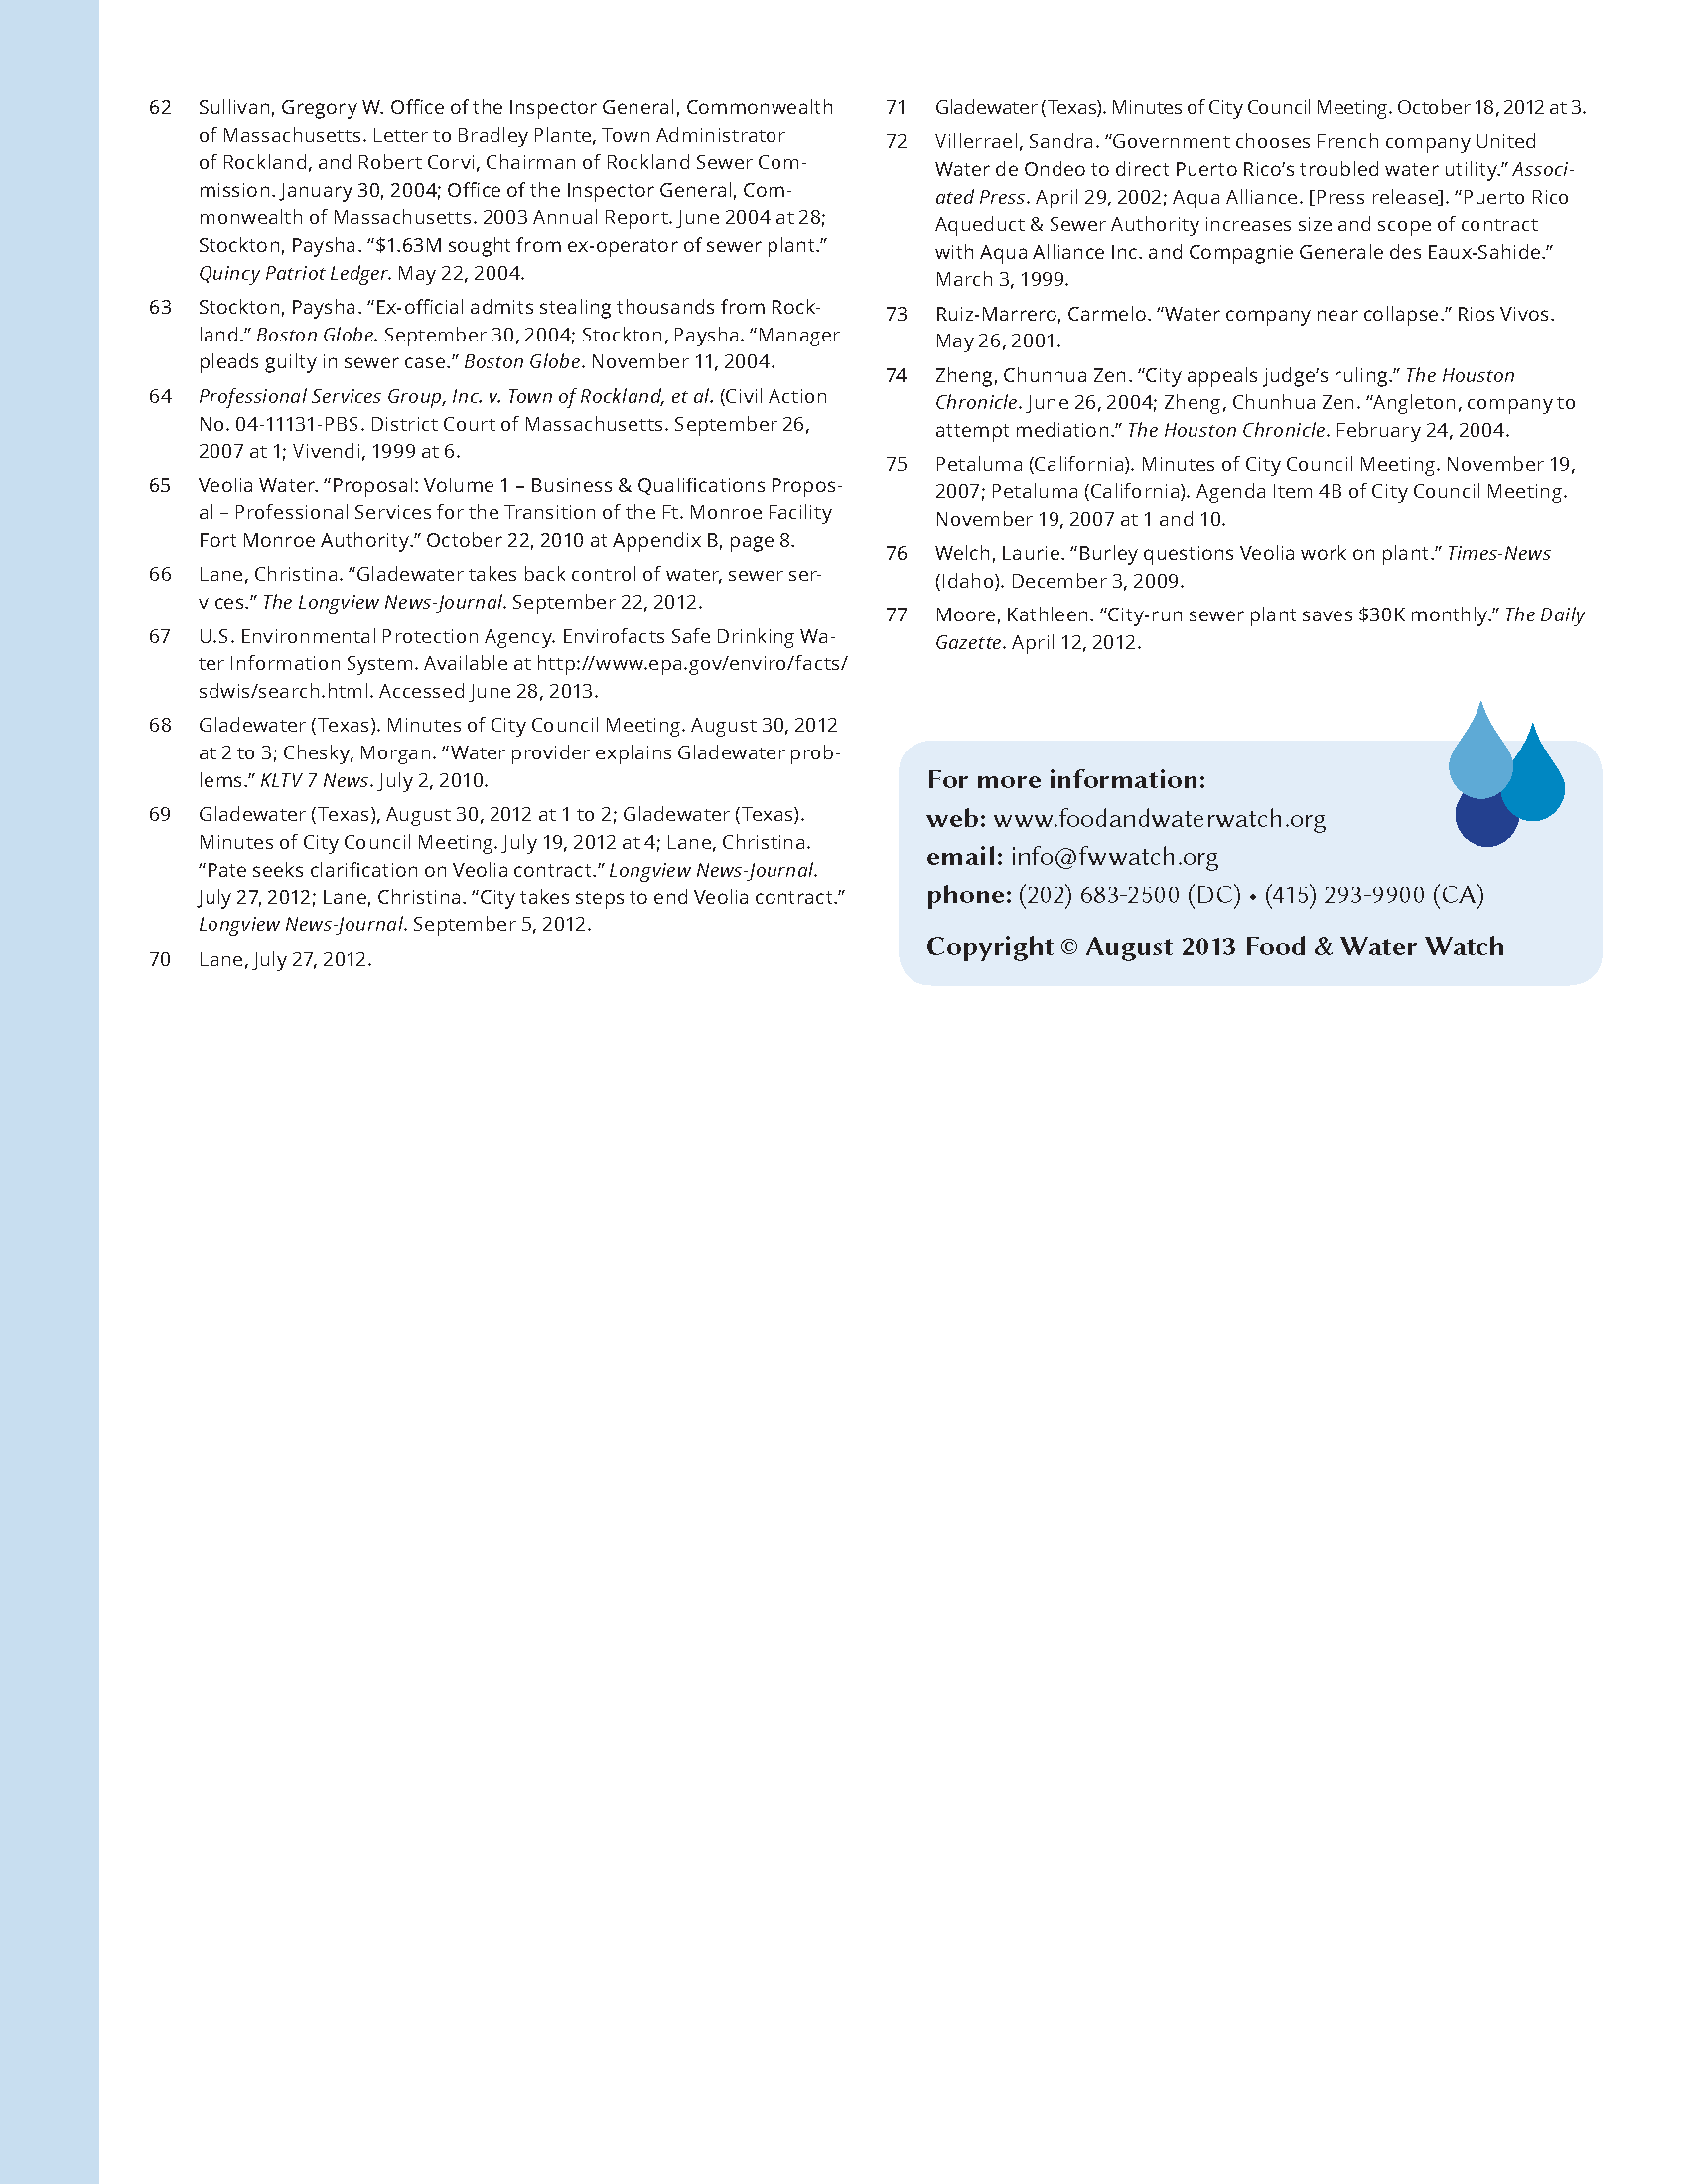 Veolia_Water_2013_Page_6